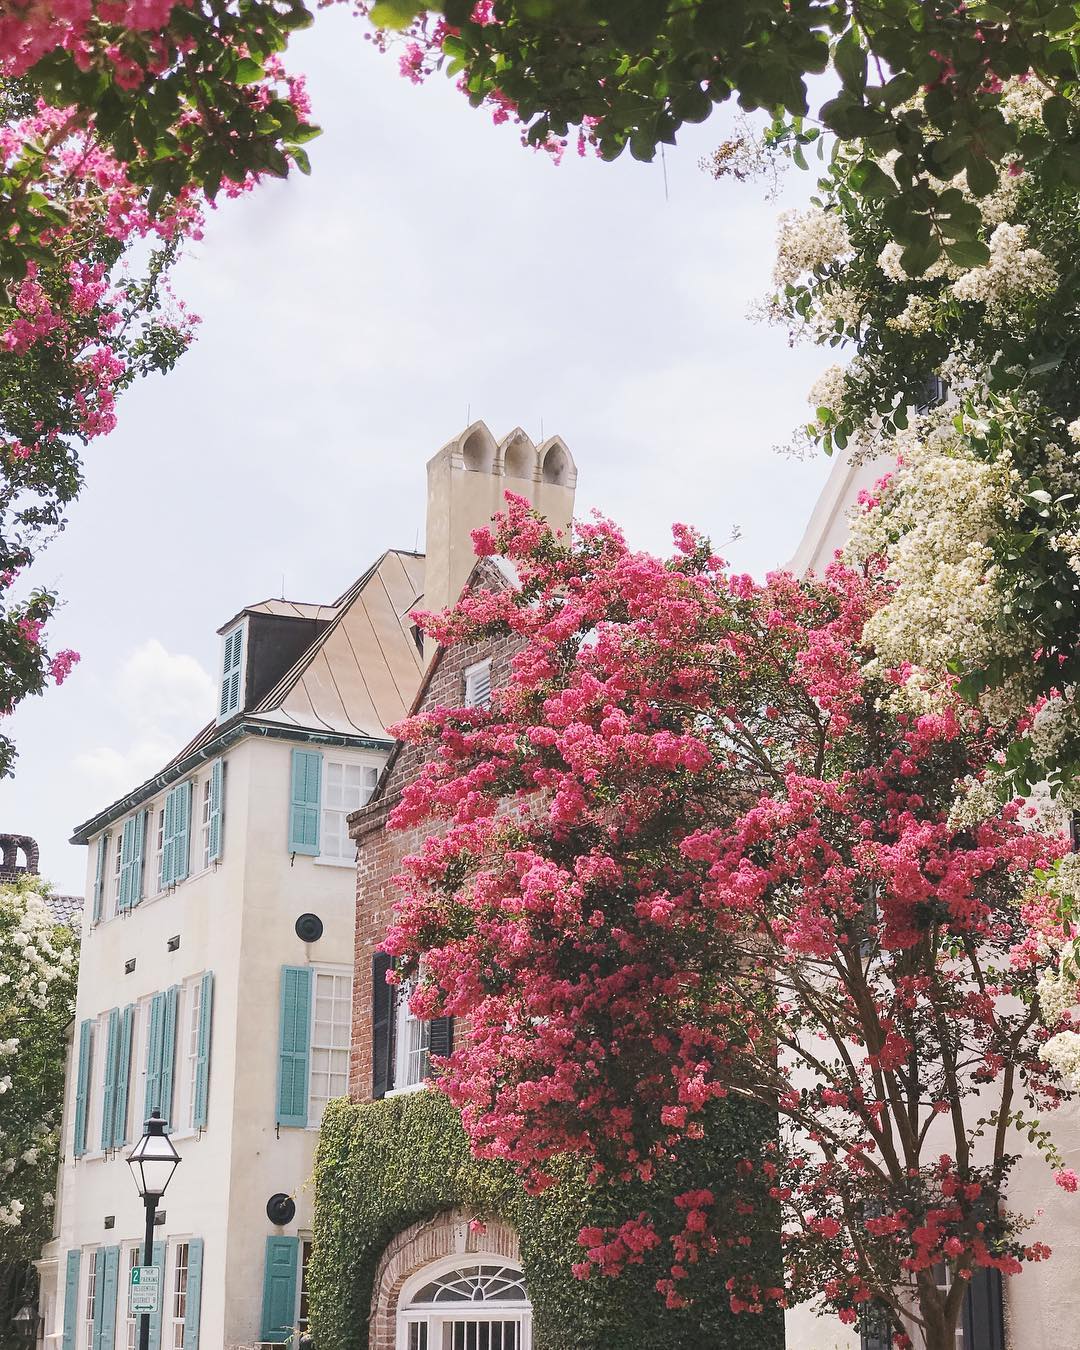 How To Spend 36 Hours In Charleston, South Carolina